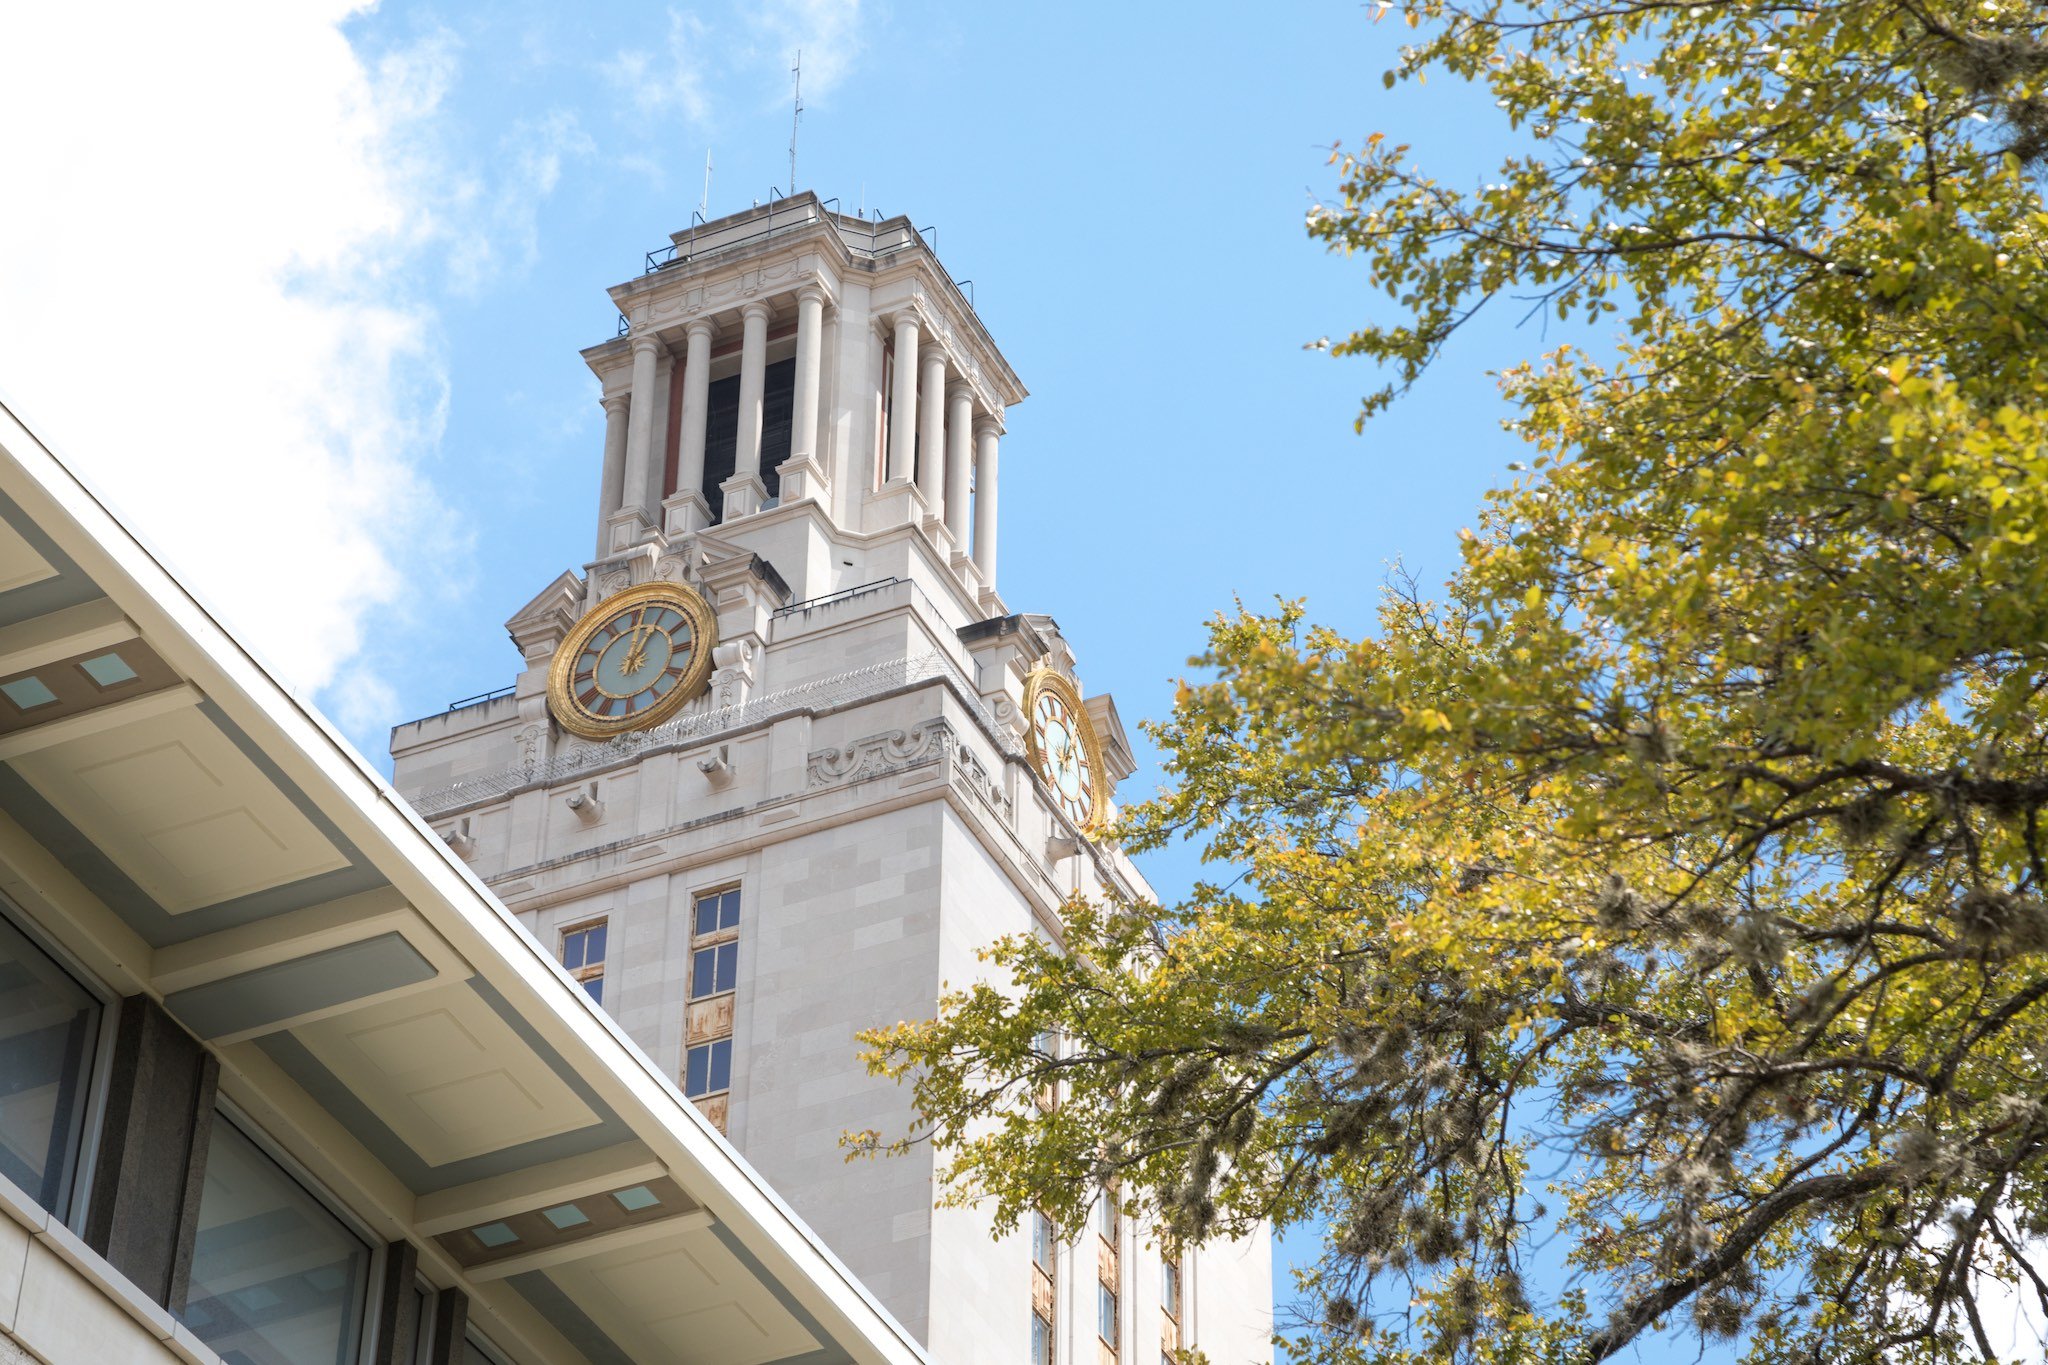 A low angle view of the UT Clock Tower with trees in the foreground at the University of Texas at Austin, under a partly cloudy blue sky.